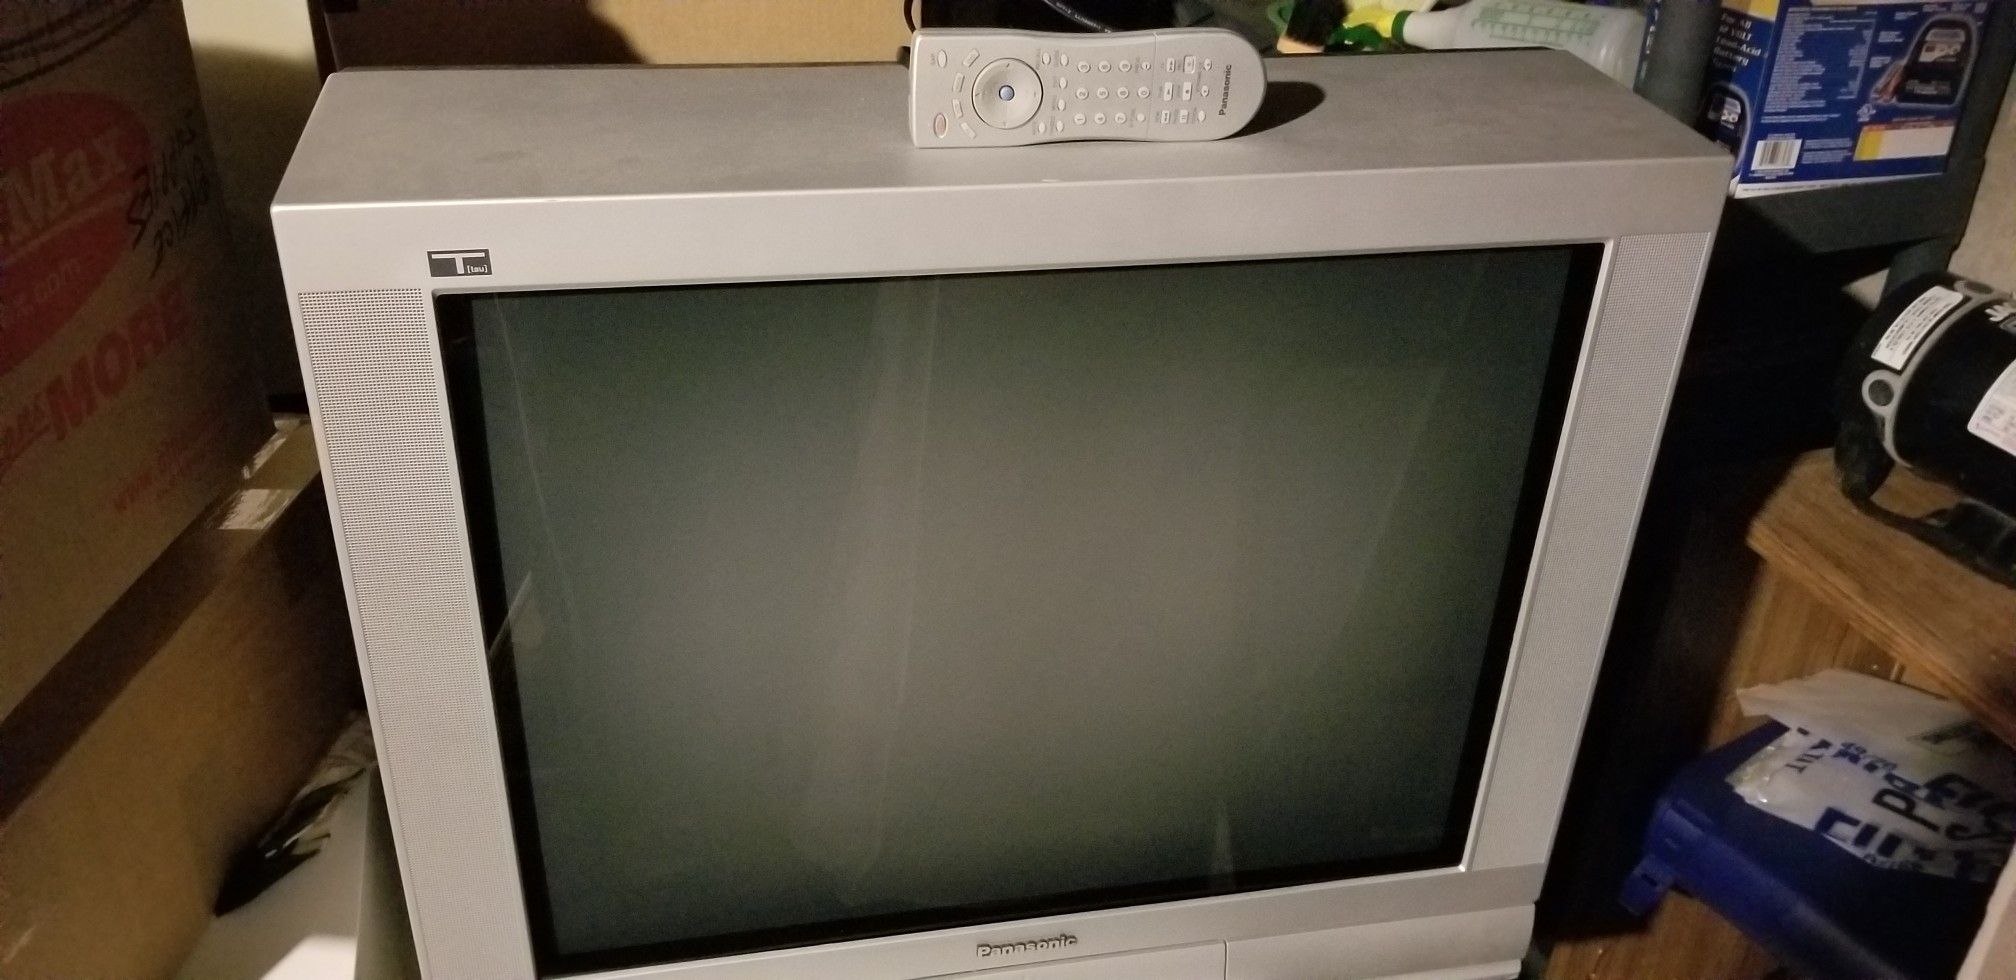 TV. Panasonic. 27 inch. Model CT 27SC14. With remote. Great condition. Lightly used. Jacks on the front for easy access.